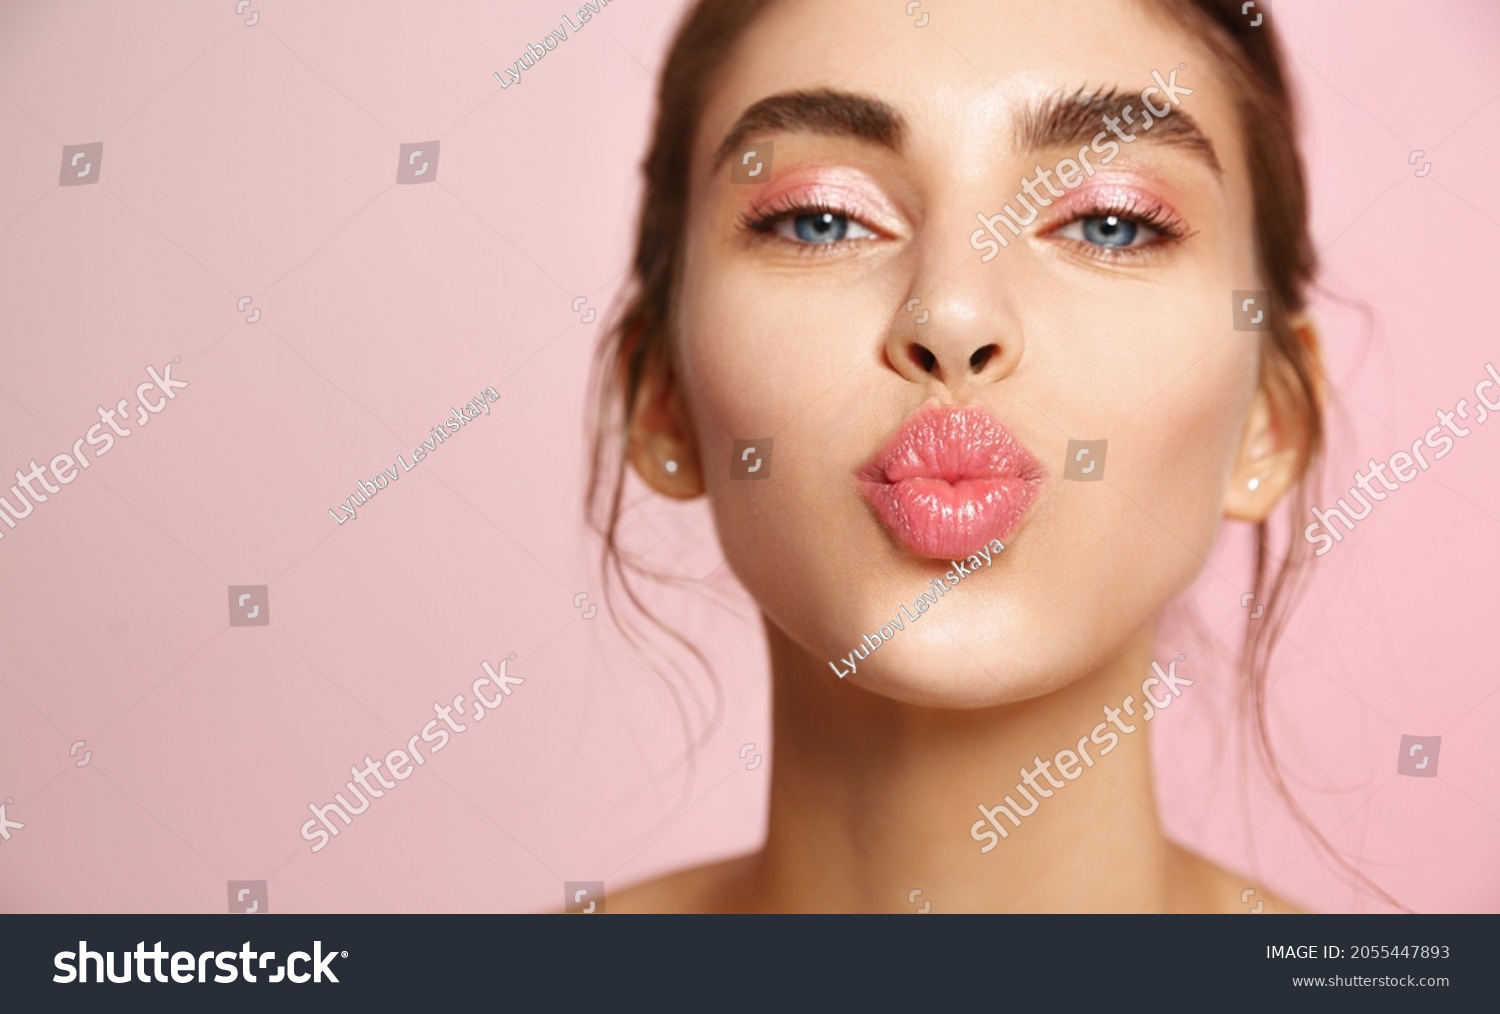 Cosmetics and skin care. Portrait of beautiful woman pucker lips, kissing, showing natural clean facial skin, standing over pink background #2055447893